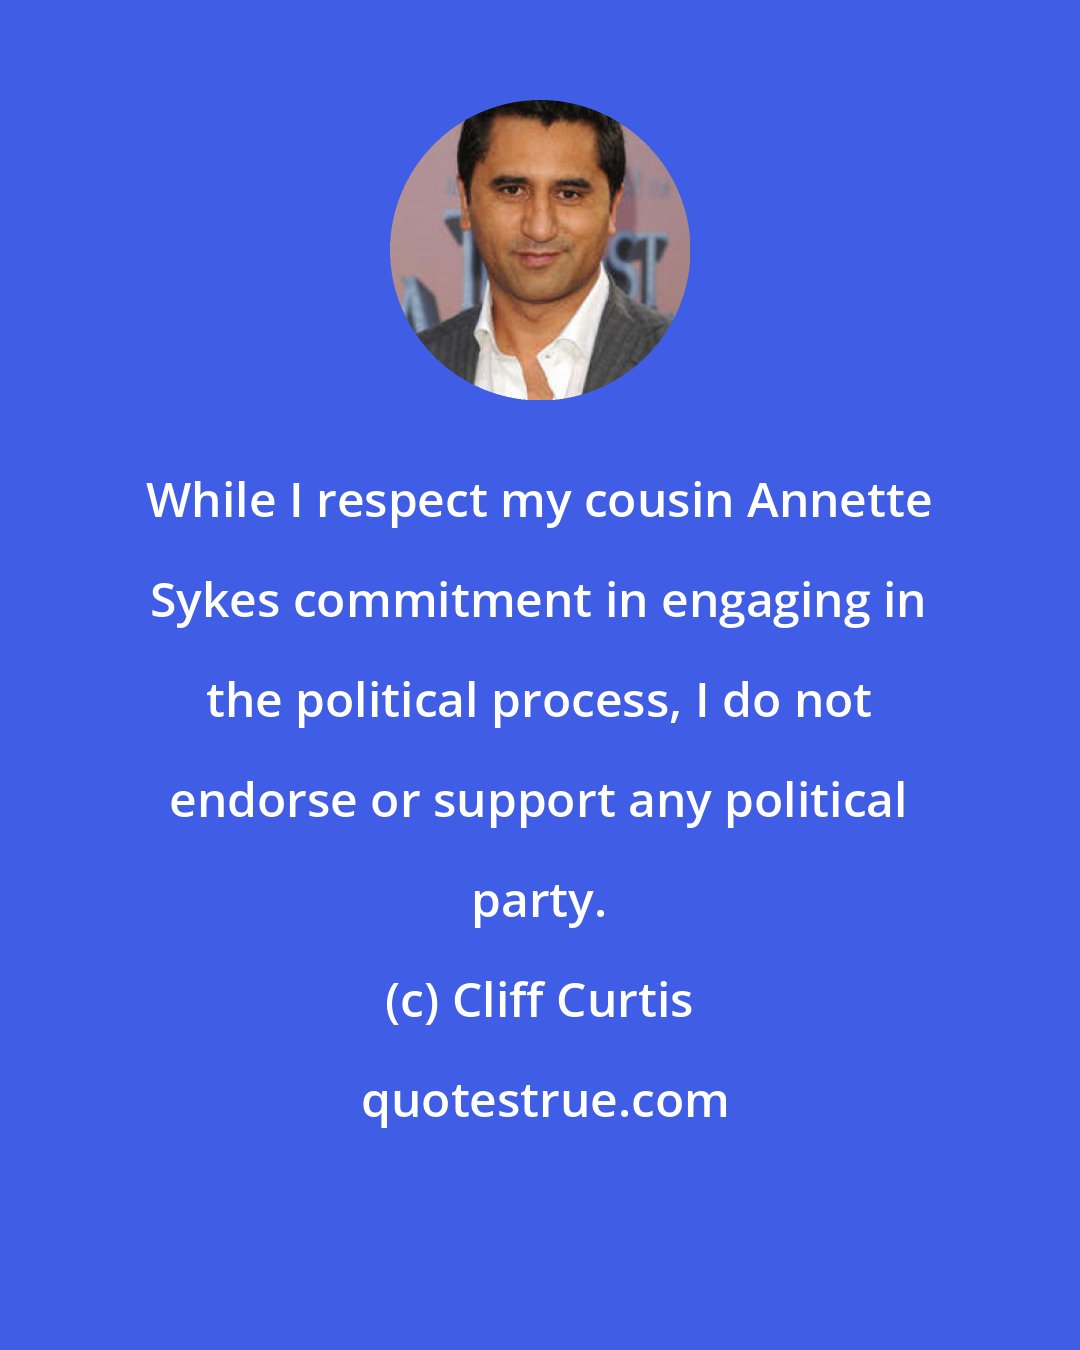 Cliff Curtis: While I respect my cousin Annette Sykes commitment in engaging in the political process, I do not endorse or support any political party.